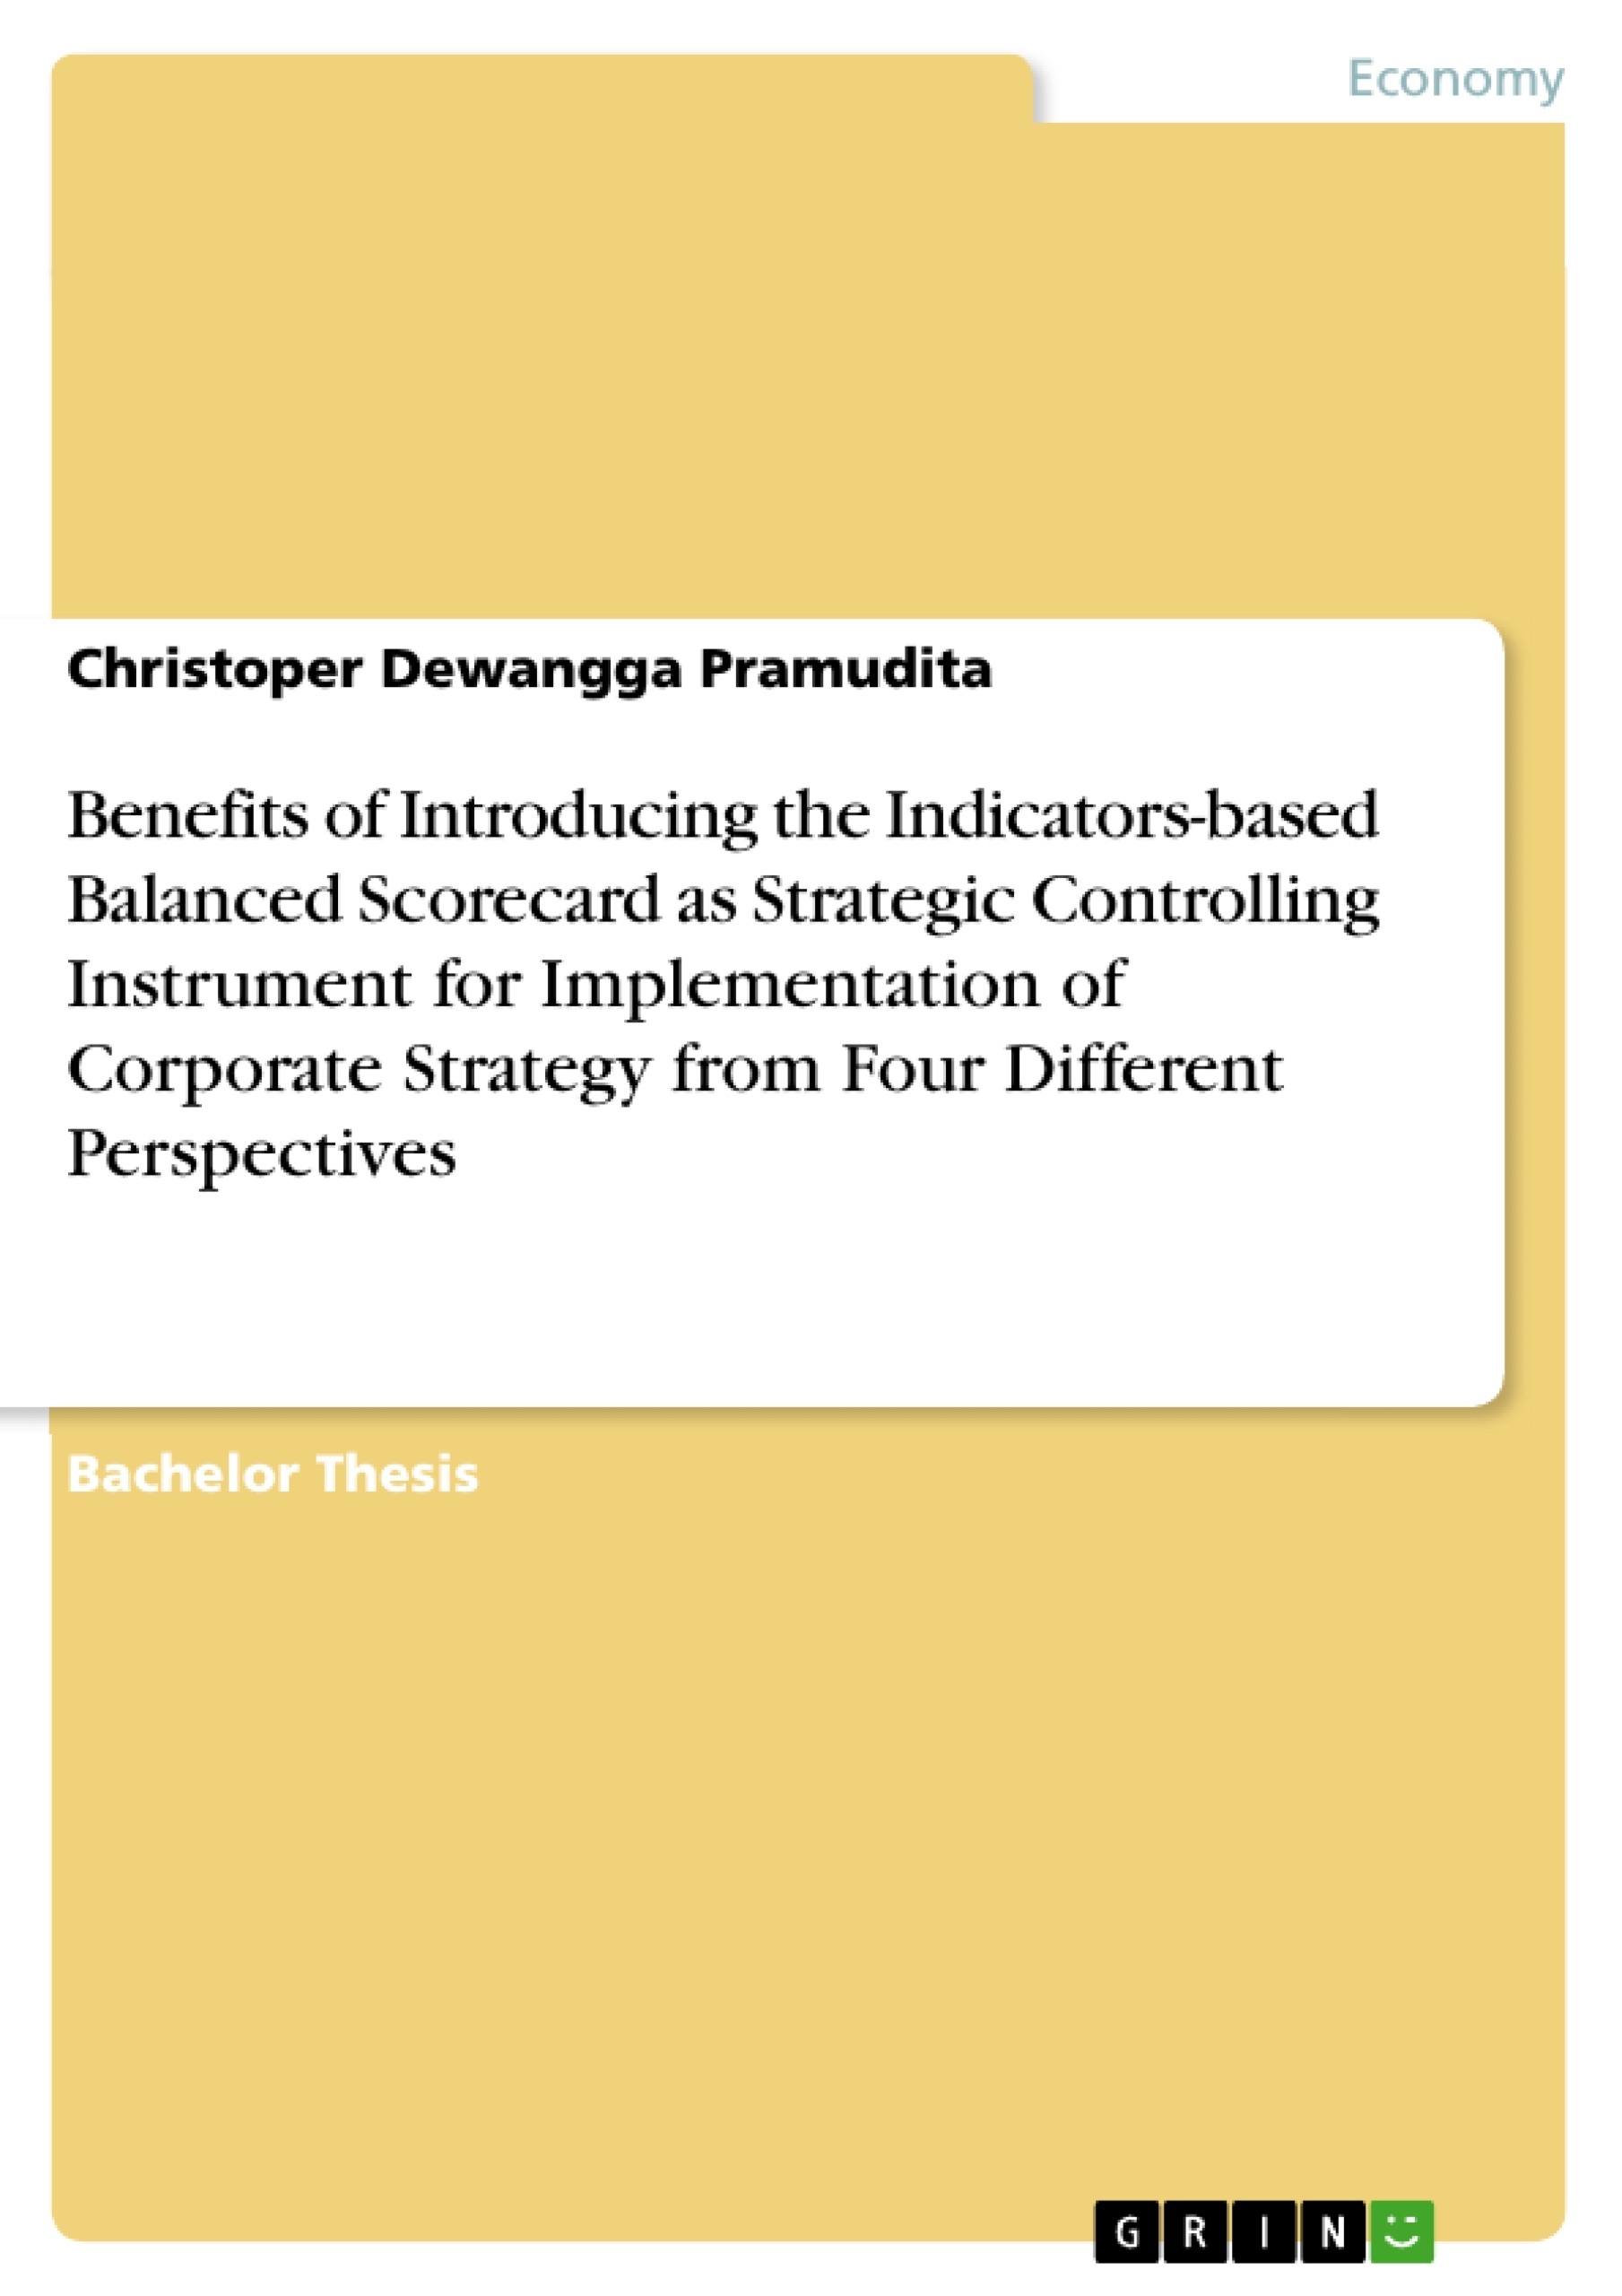 Title: Benefits of Introducing the Indicators-based Balanced Scorecard as Strategic Controlling Instrument for Implementation of Corporate Strategy from Four Different Perspectives